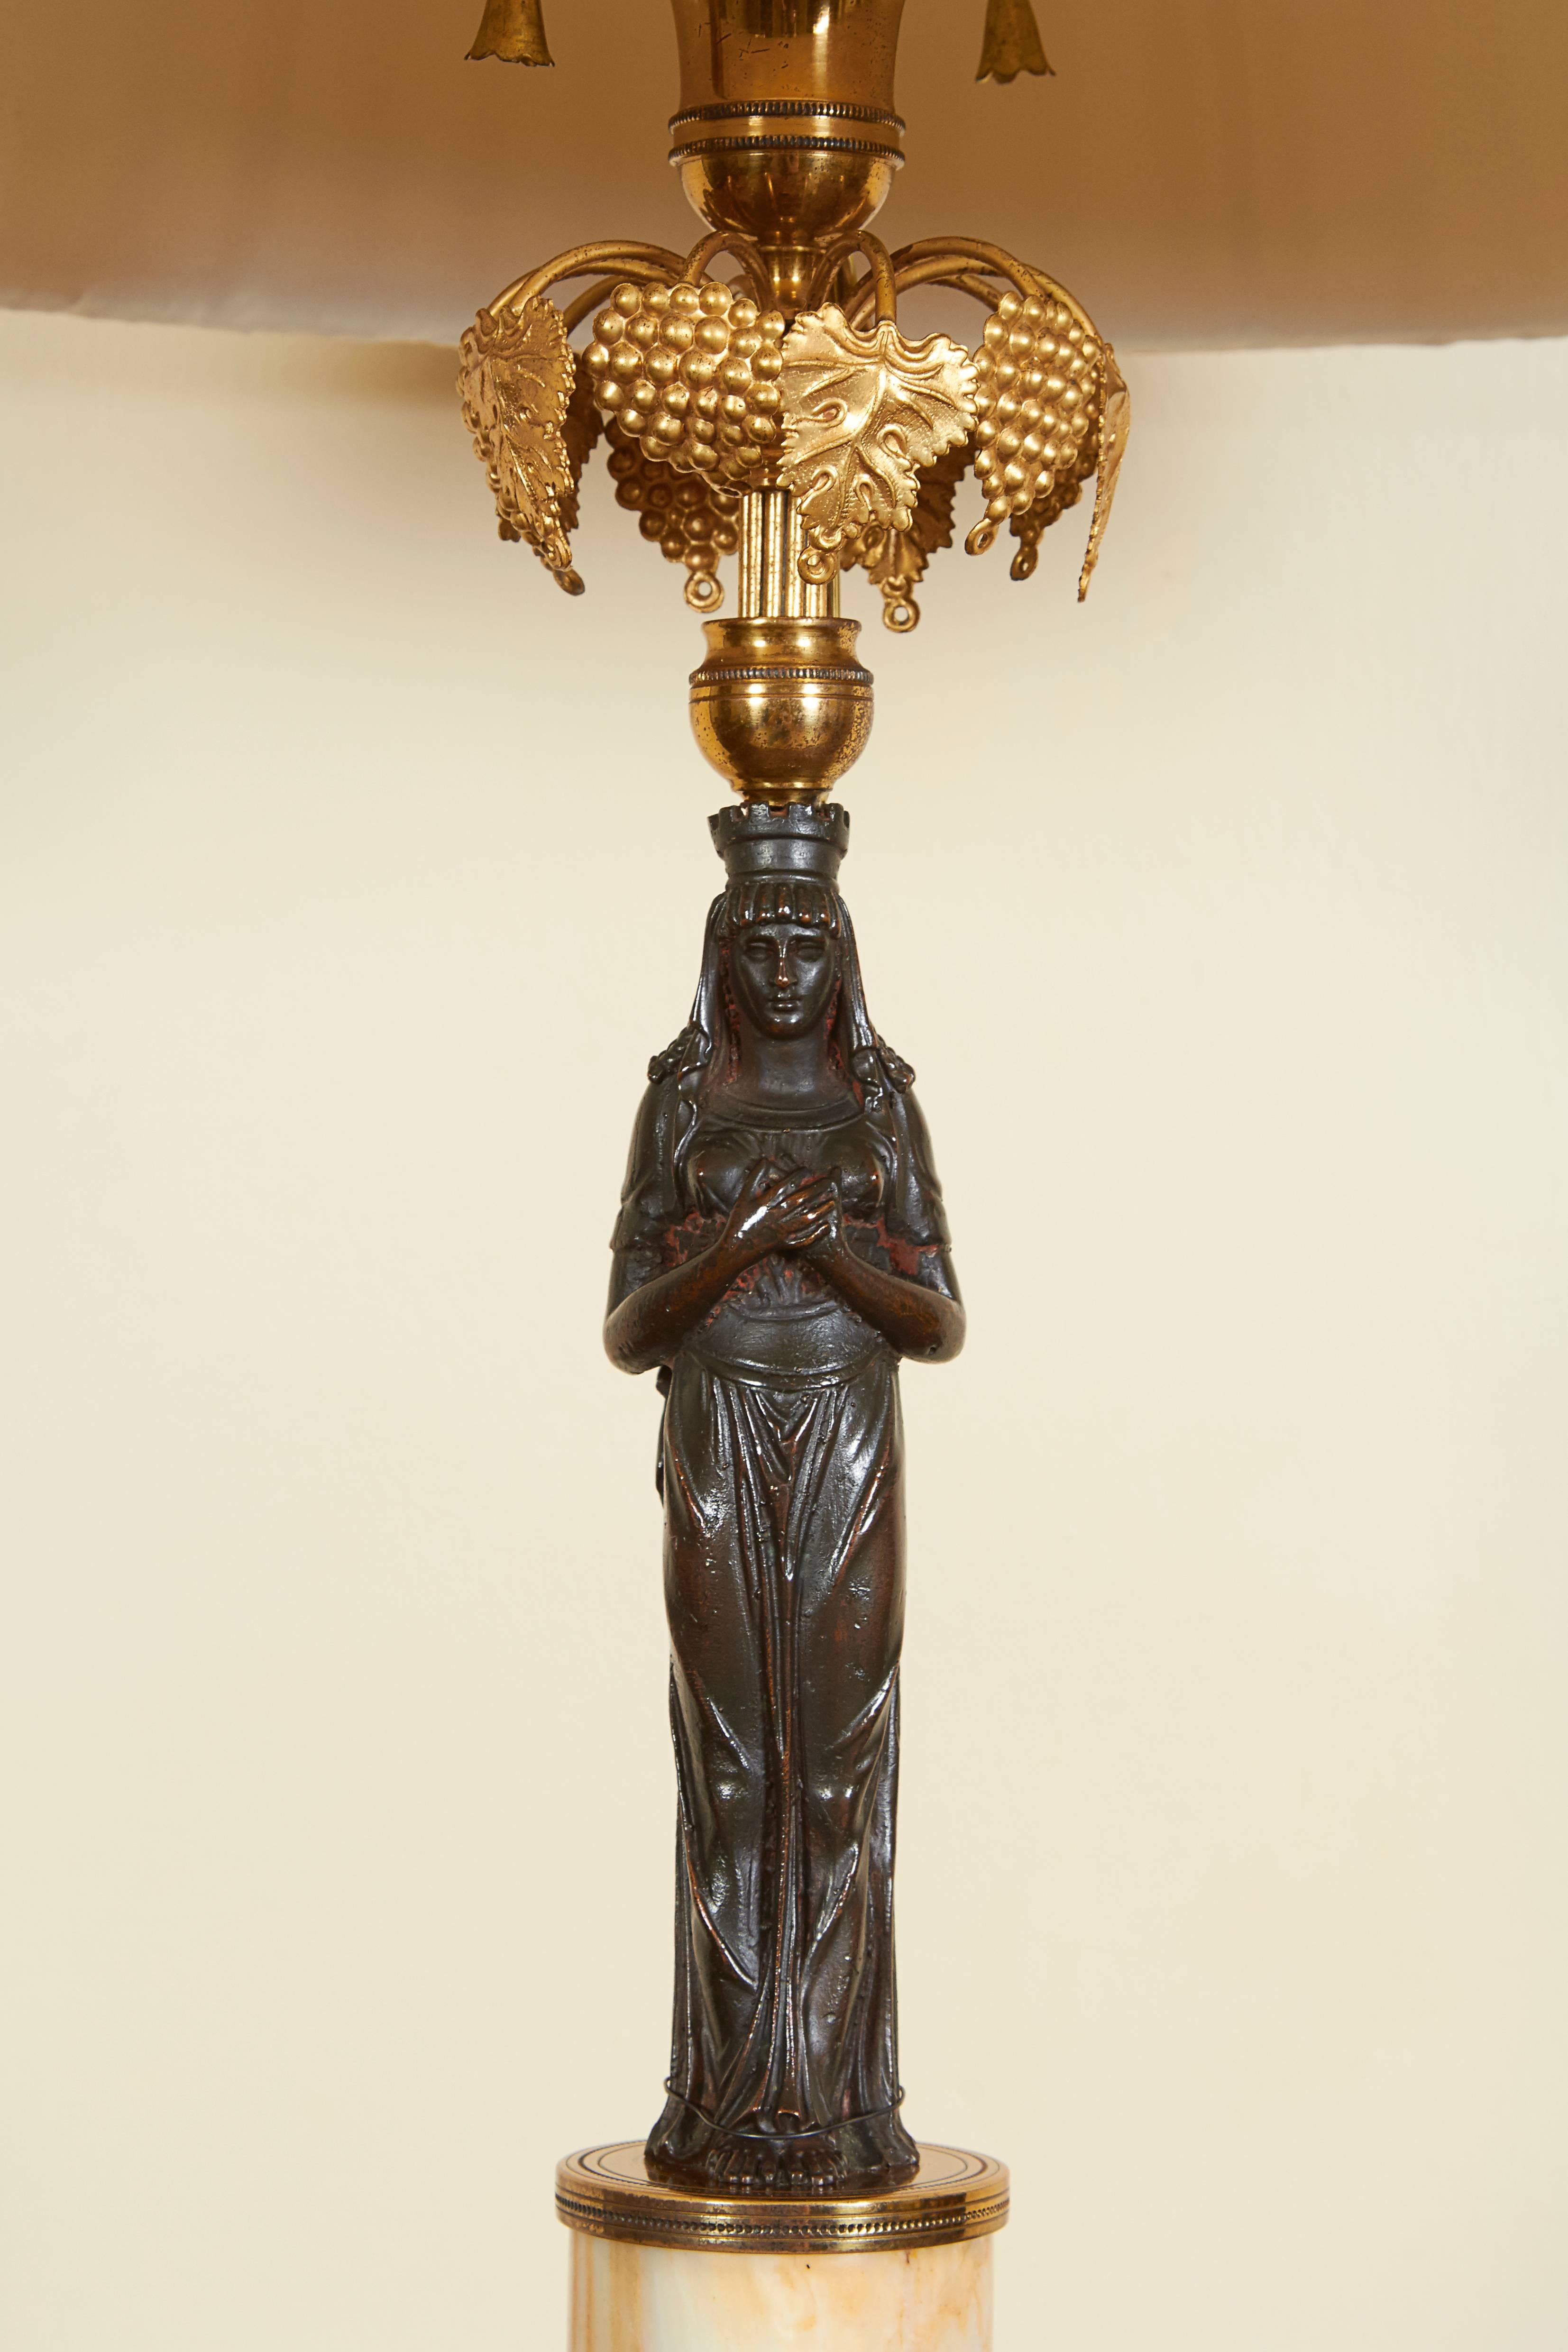 20th Century Pair of Neoclassical Style Figural Lamps